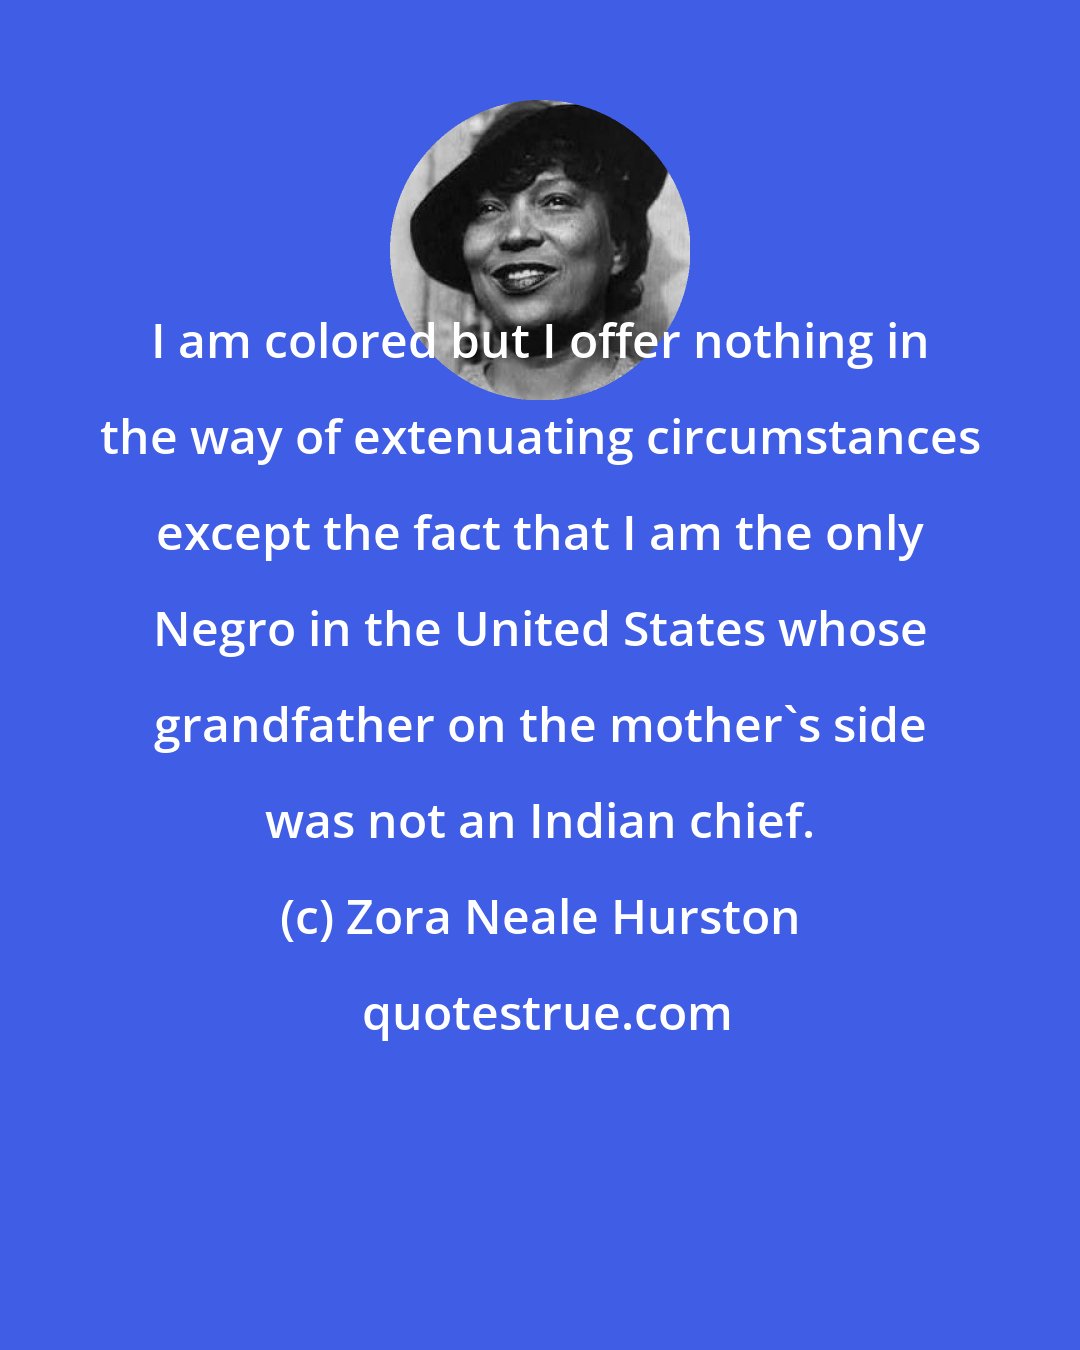 Zora Neale Hurston: I am colored but I offer nothing in the way of extenuating circumstances except the fact that I am the only Negro in the United States whose grandfather on the mother's side was not an Indian chief.